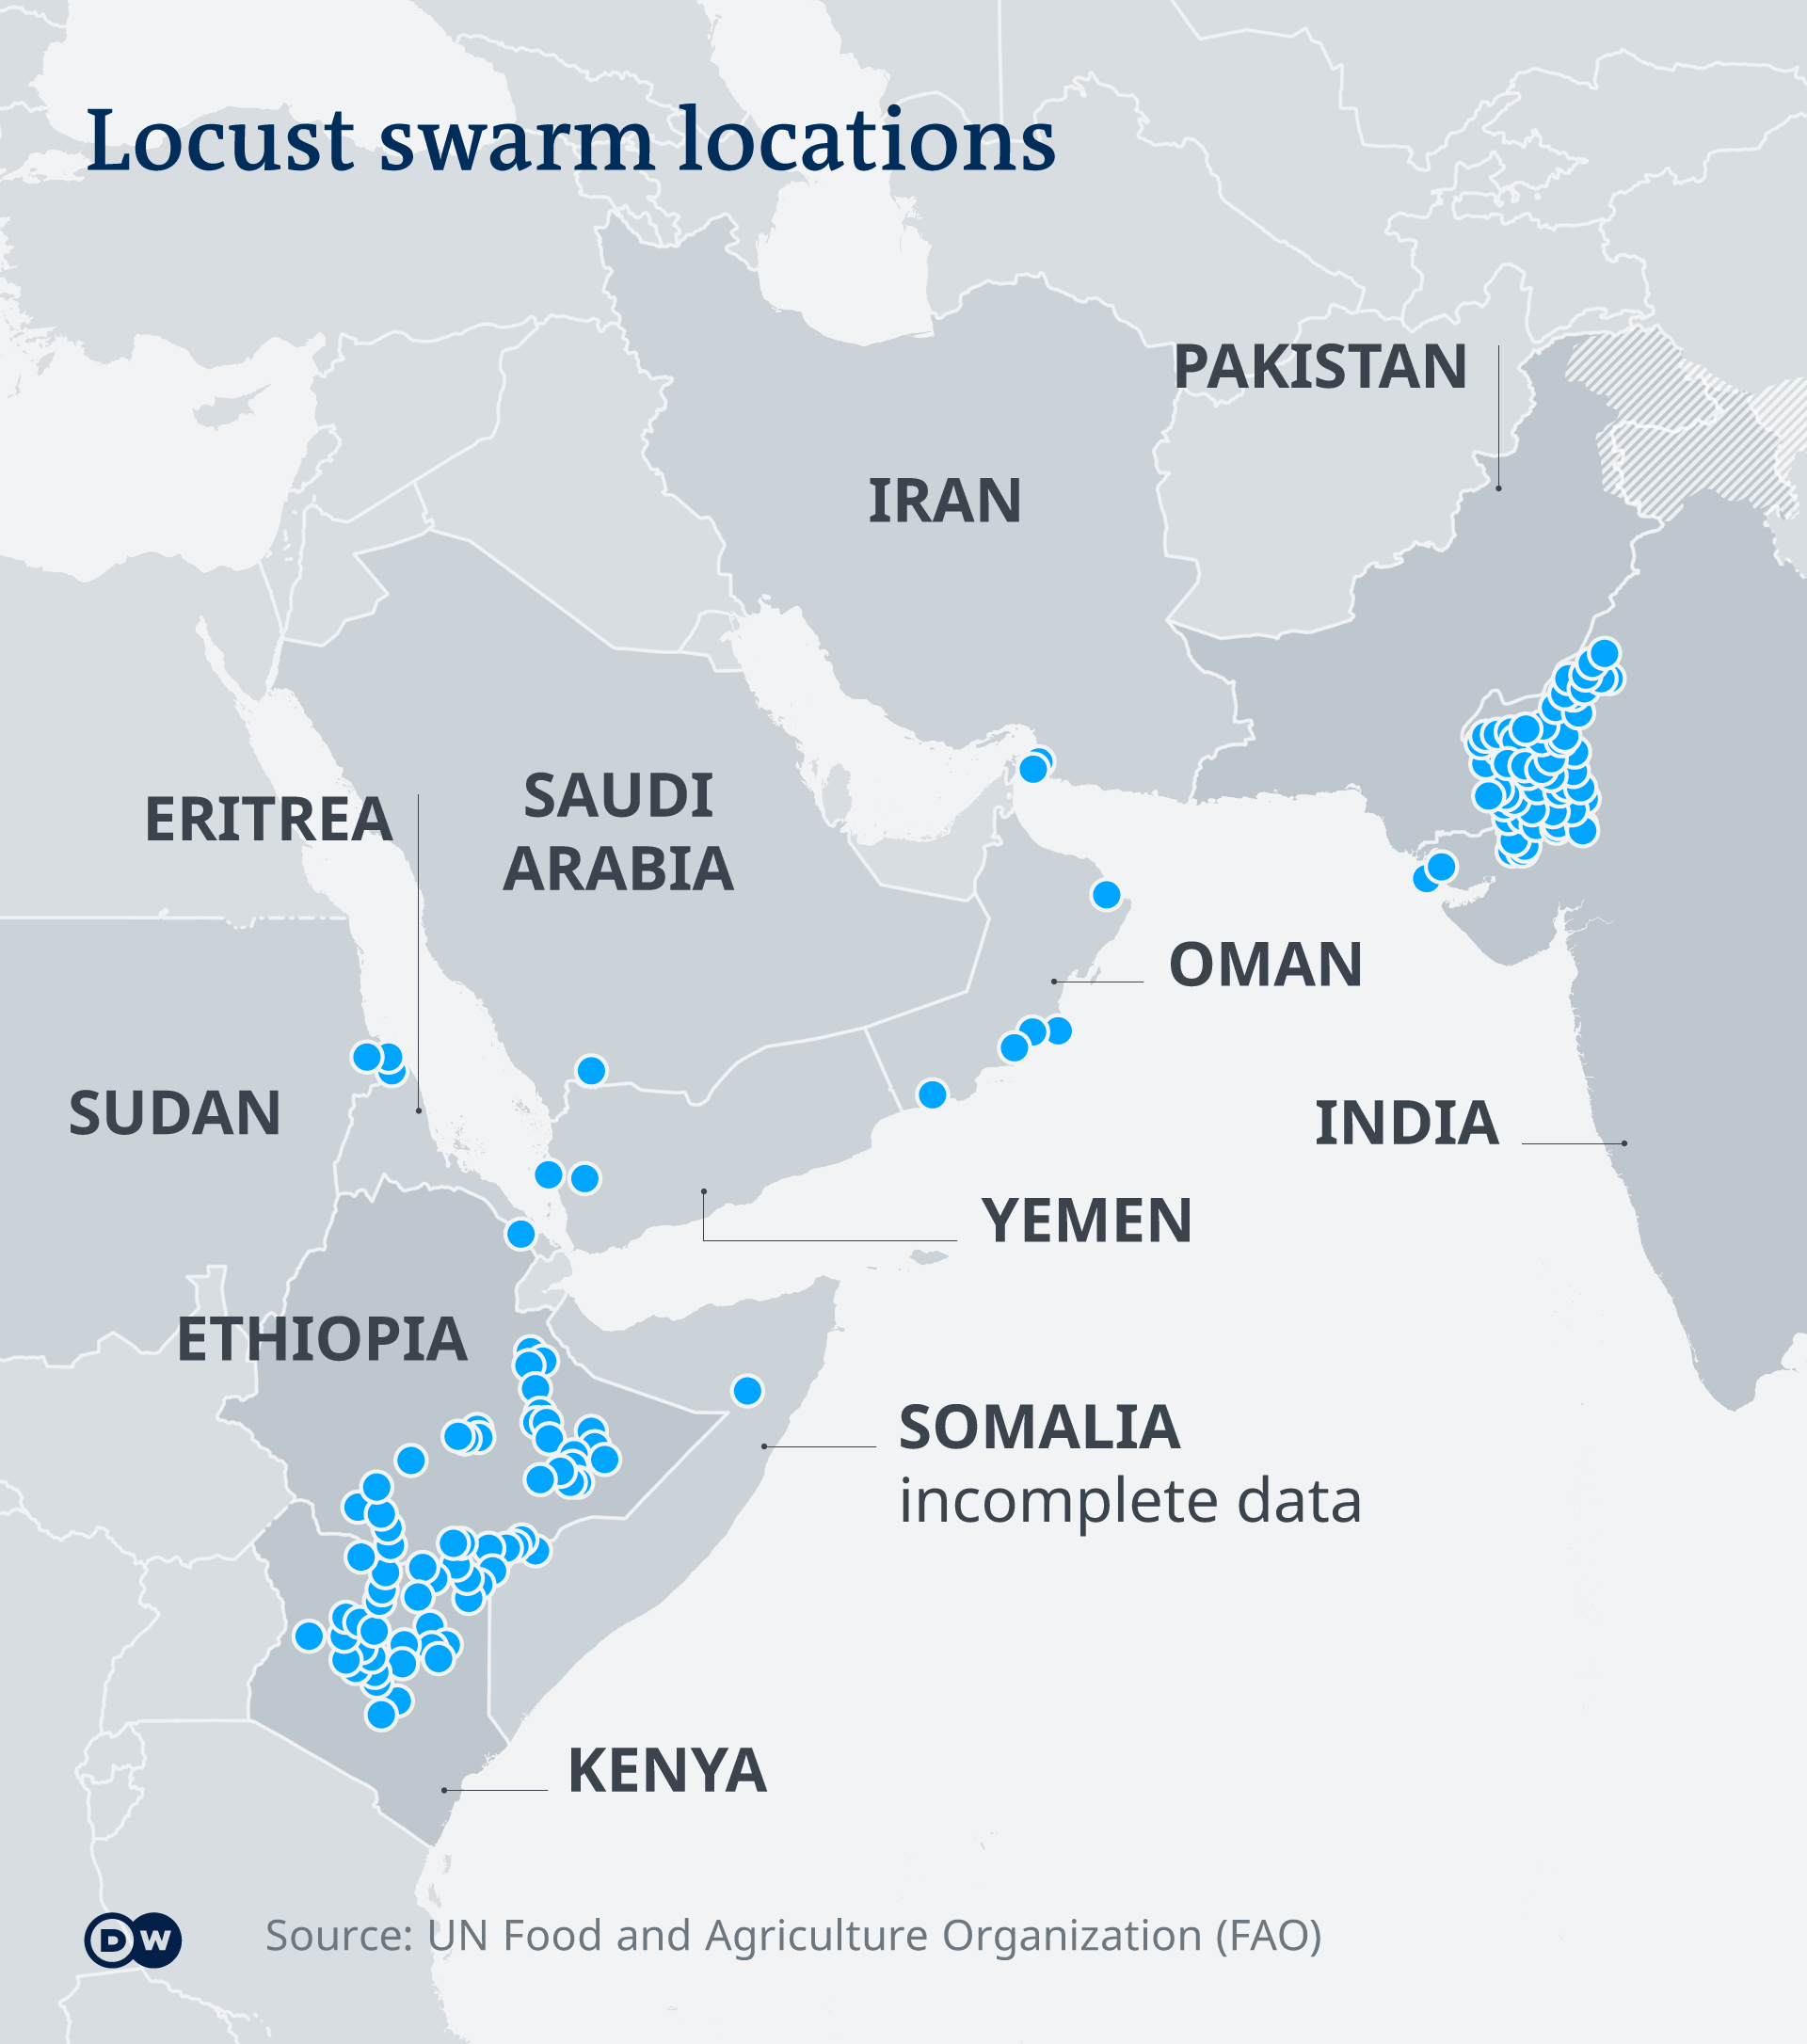 A map showing the location of locust swarms